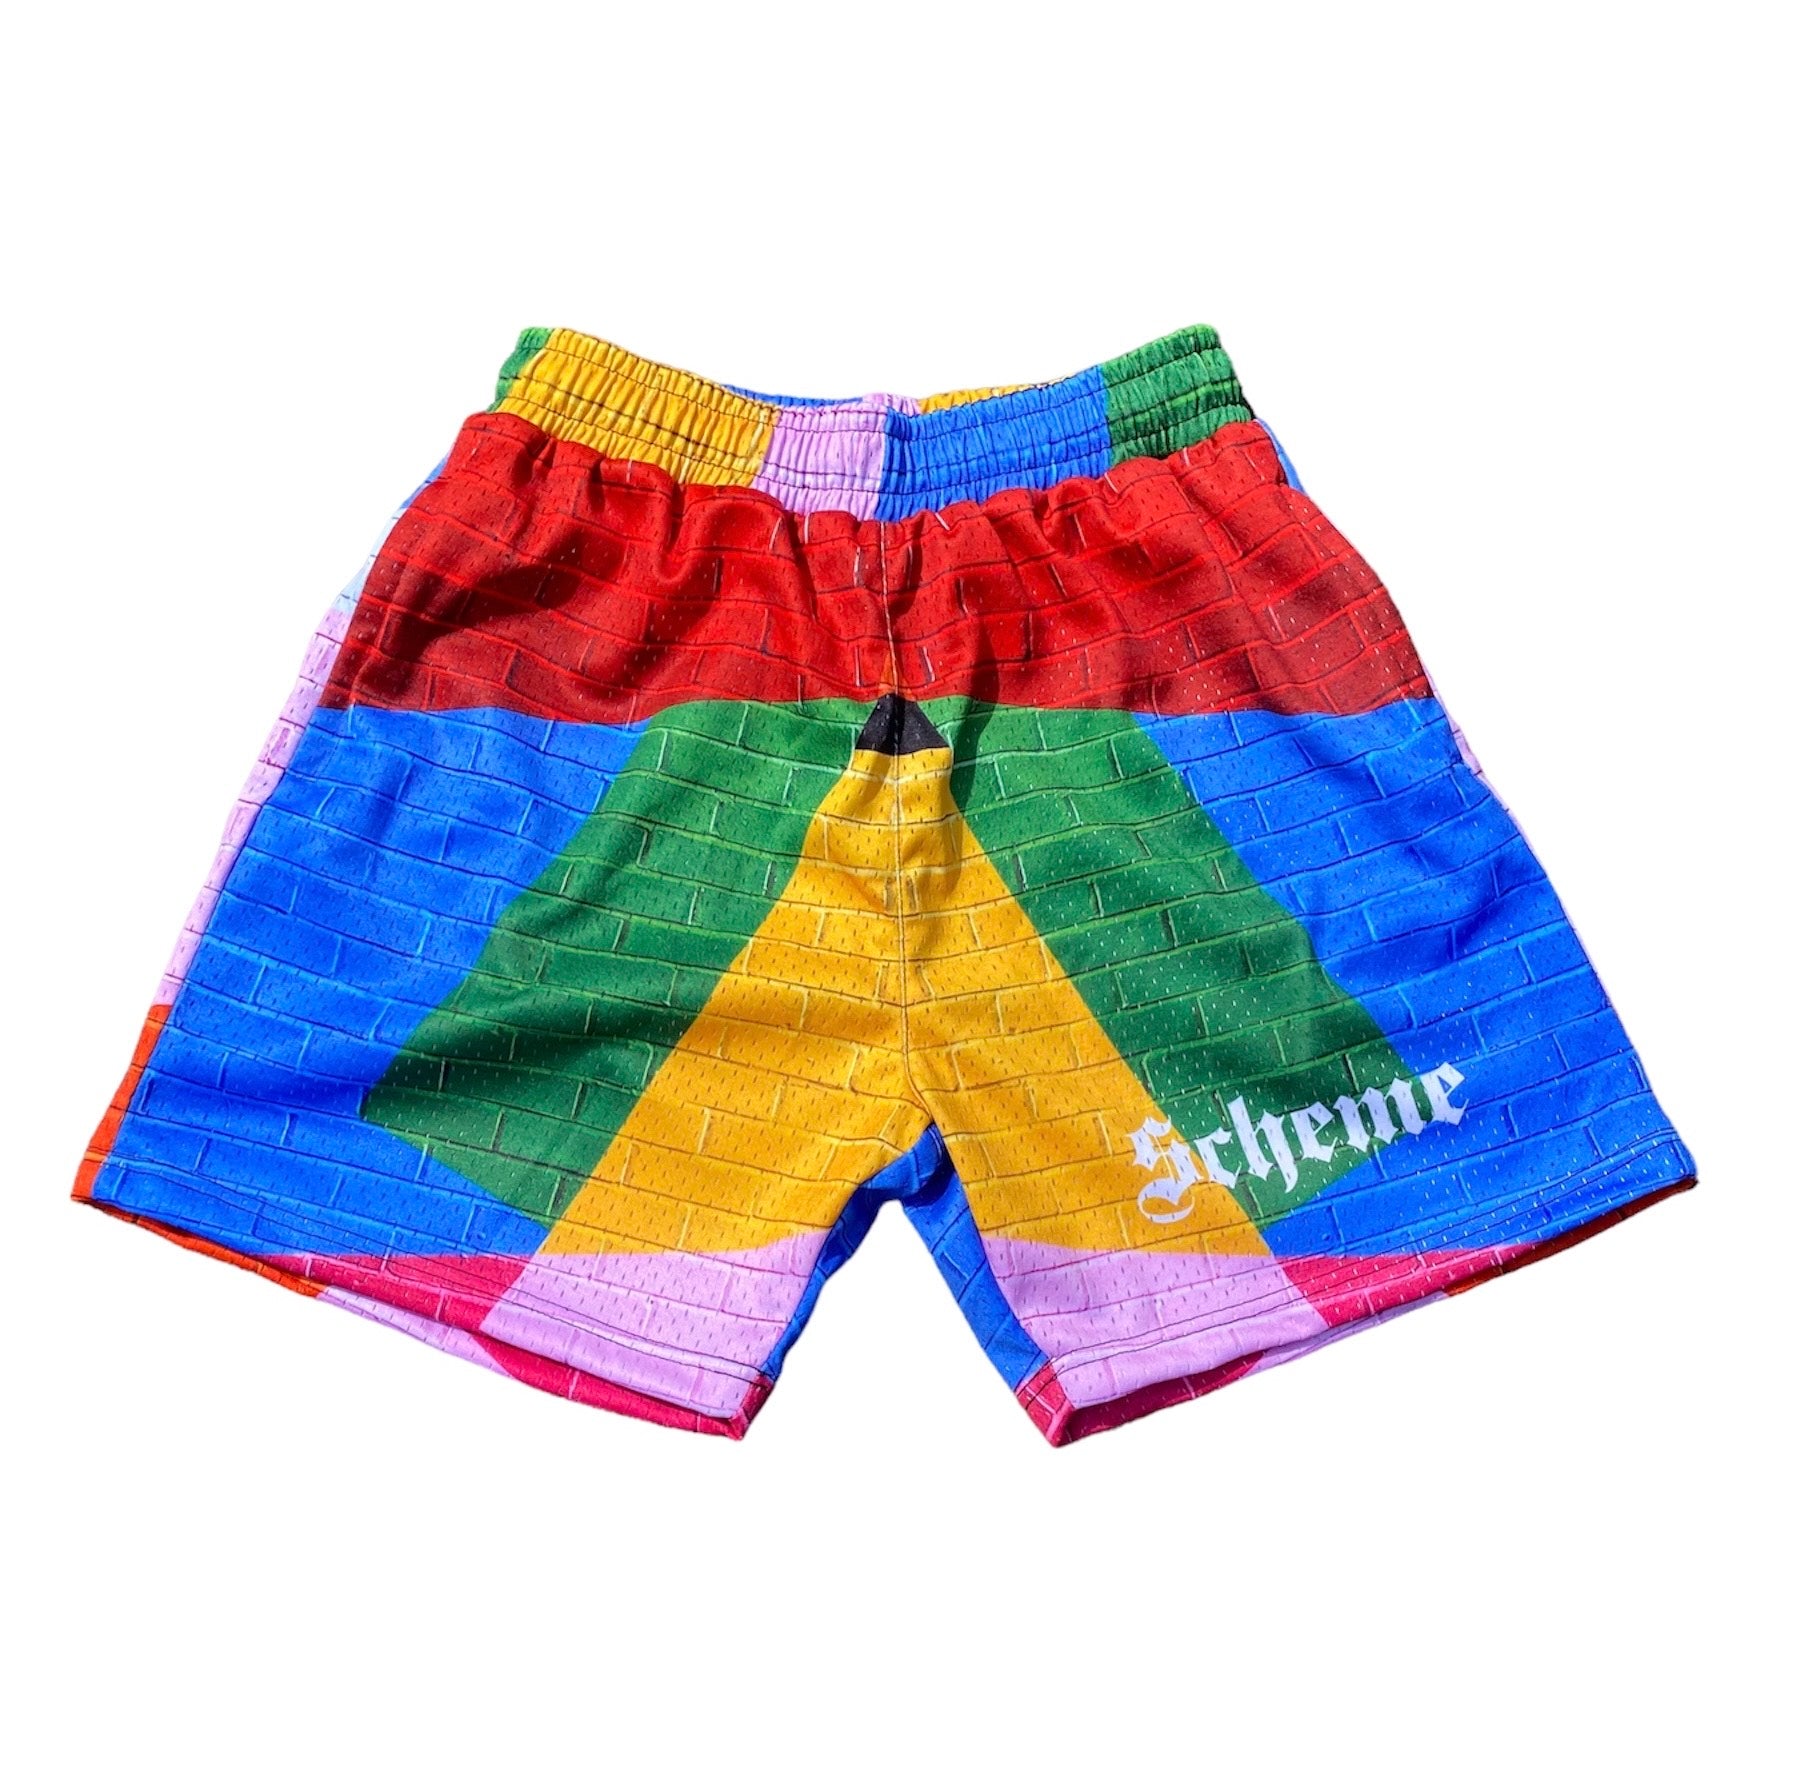 Men's graphic mesh shorts with a picture of bricks multi color  Carolina blue, red, pink, green, black, yellow